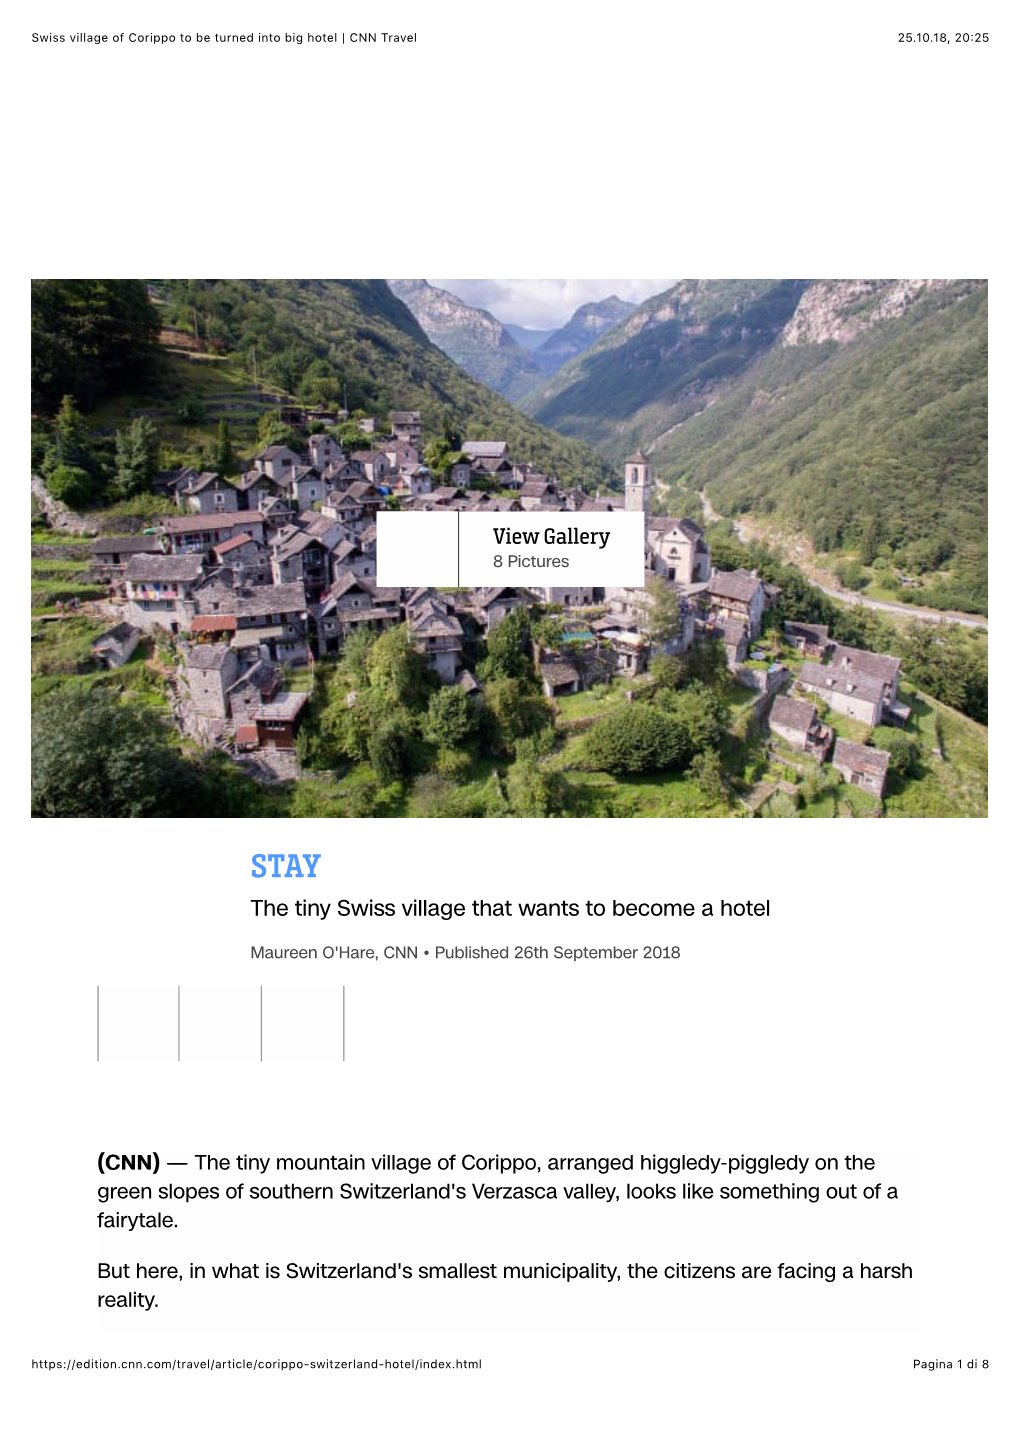 Swiss Village of Corippo to Be Turned Into Big Hotel | CNN Travel 25.10.18, 20:25